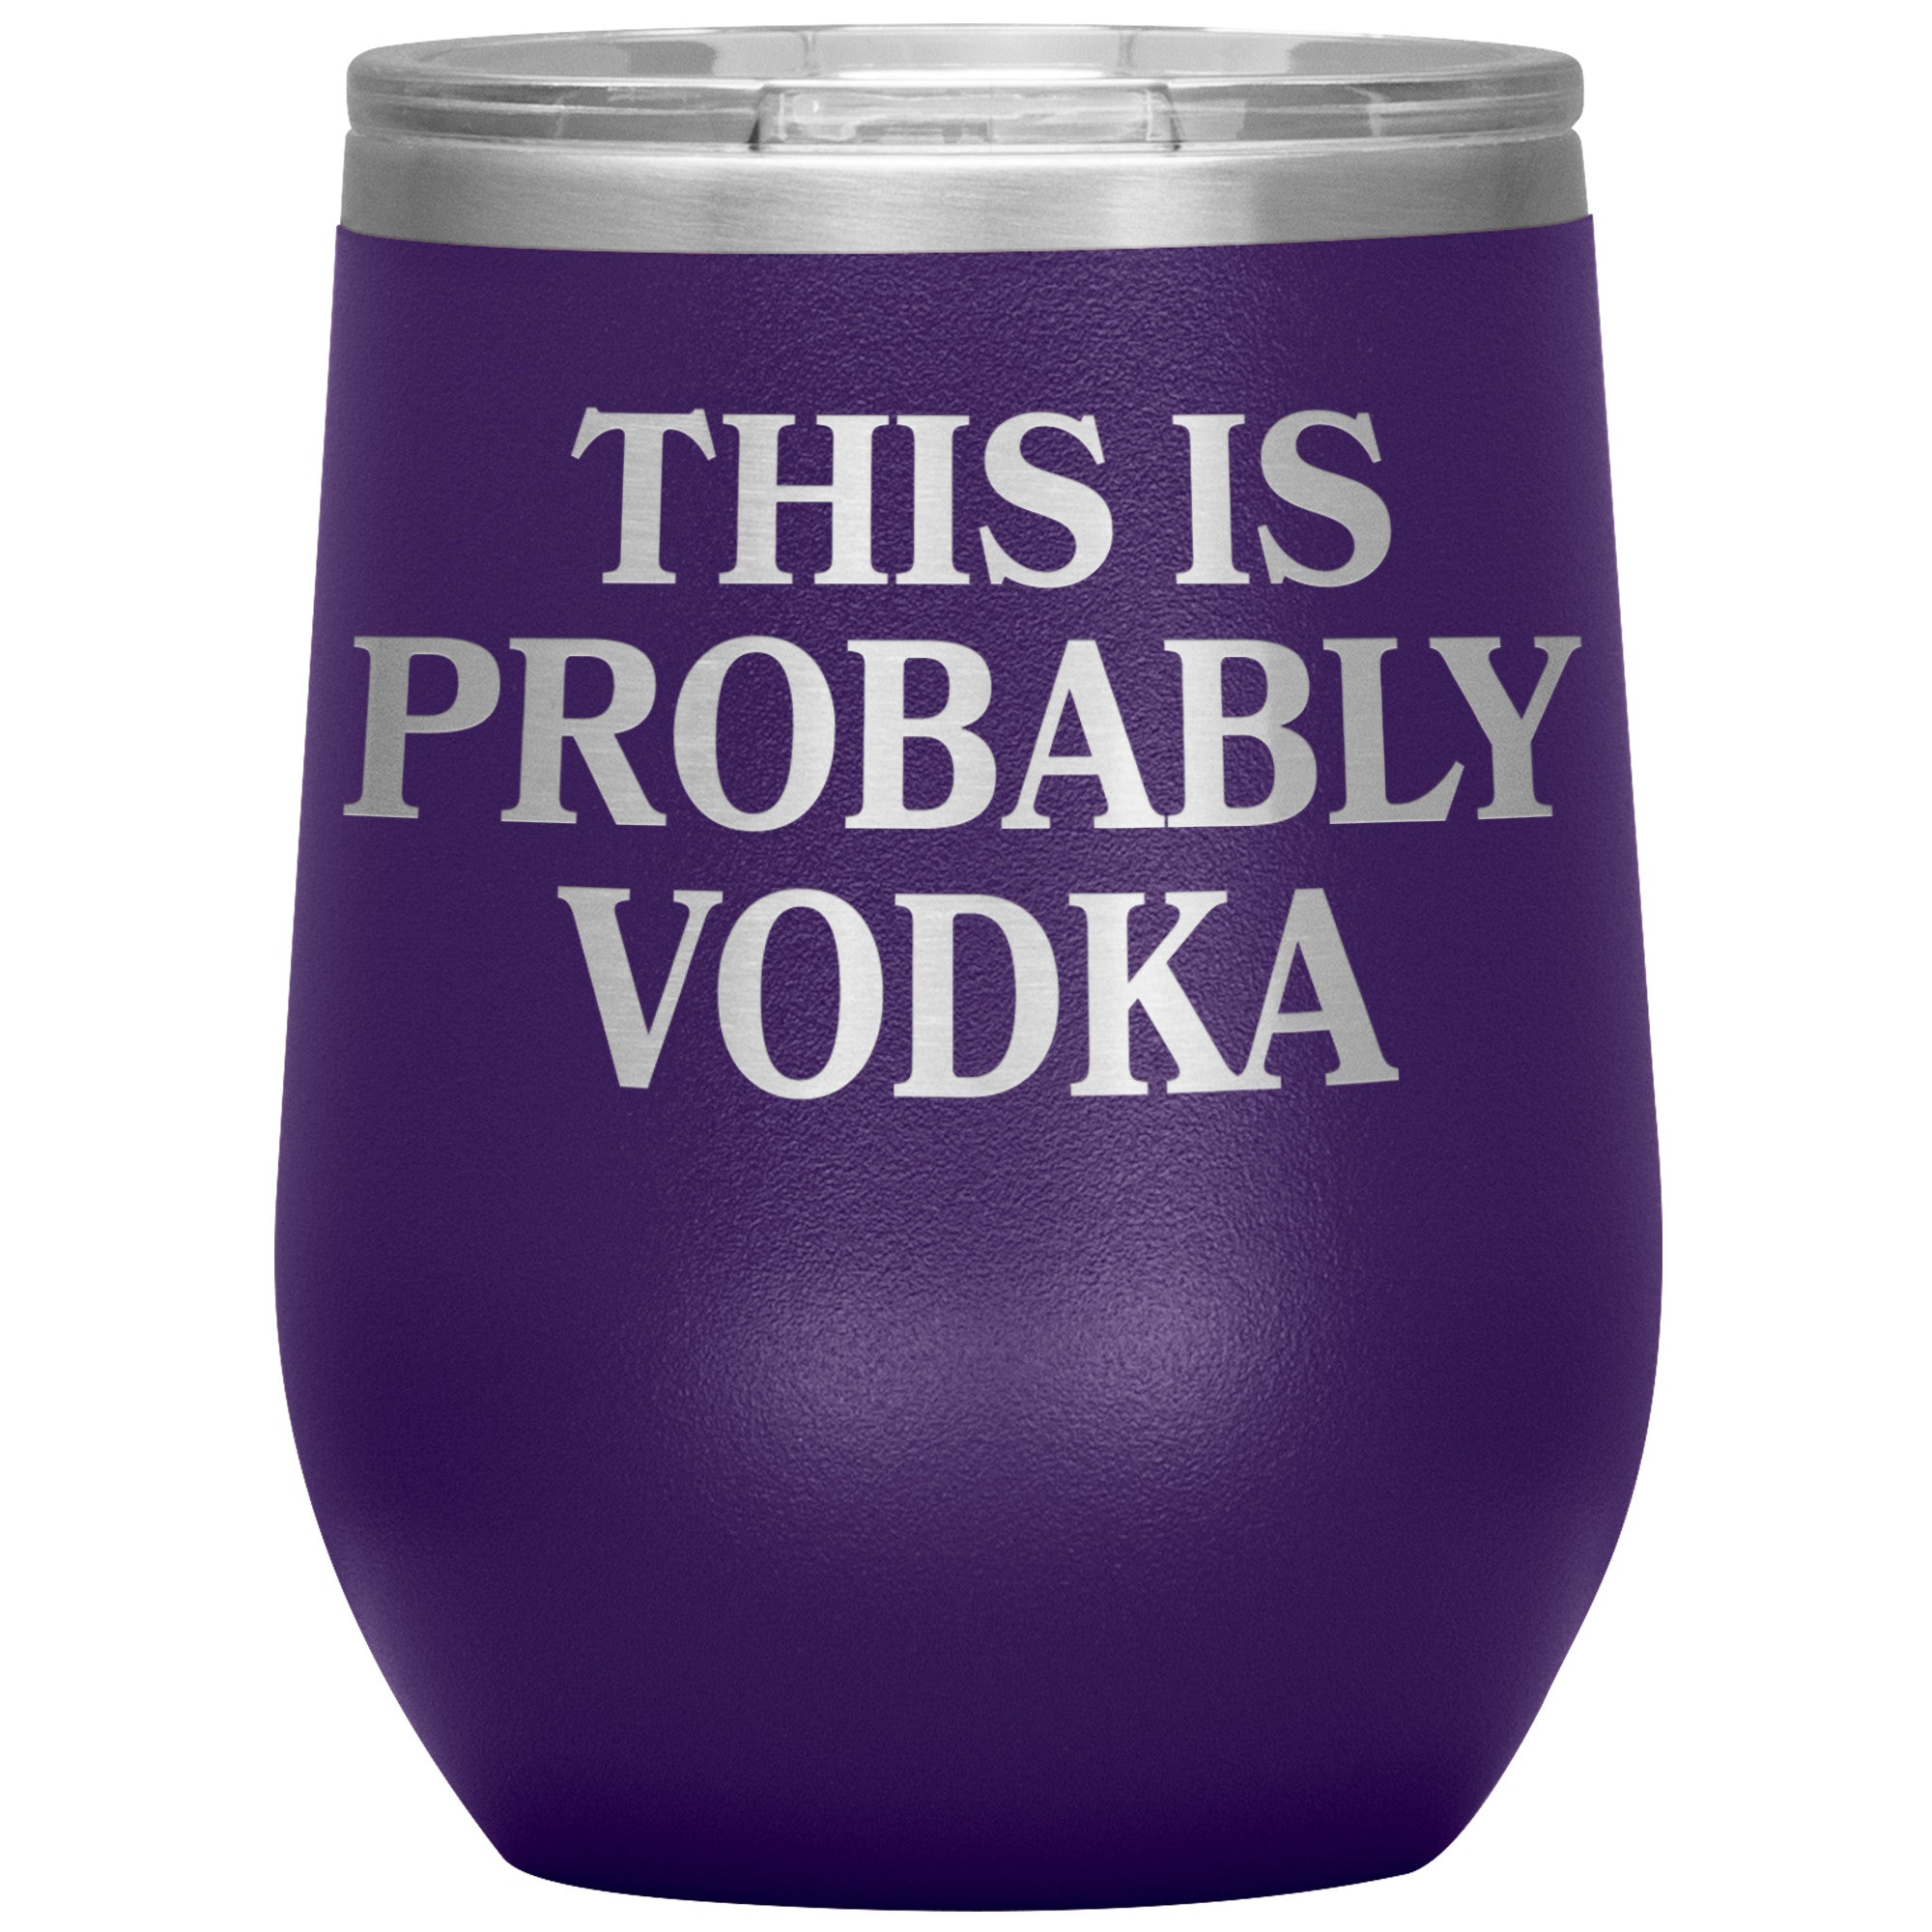 This Is Probably Vodka Insulated Wine Tumbler Tumblers teelaunch Purple  